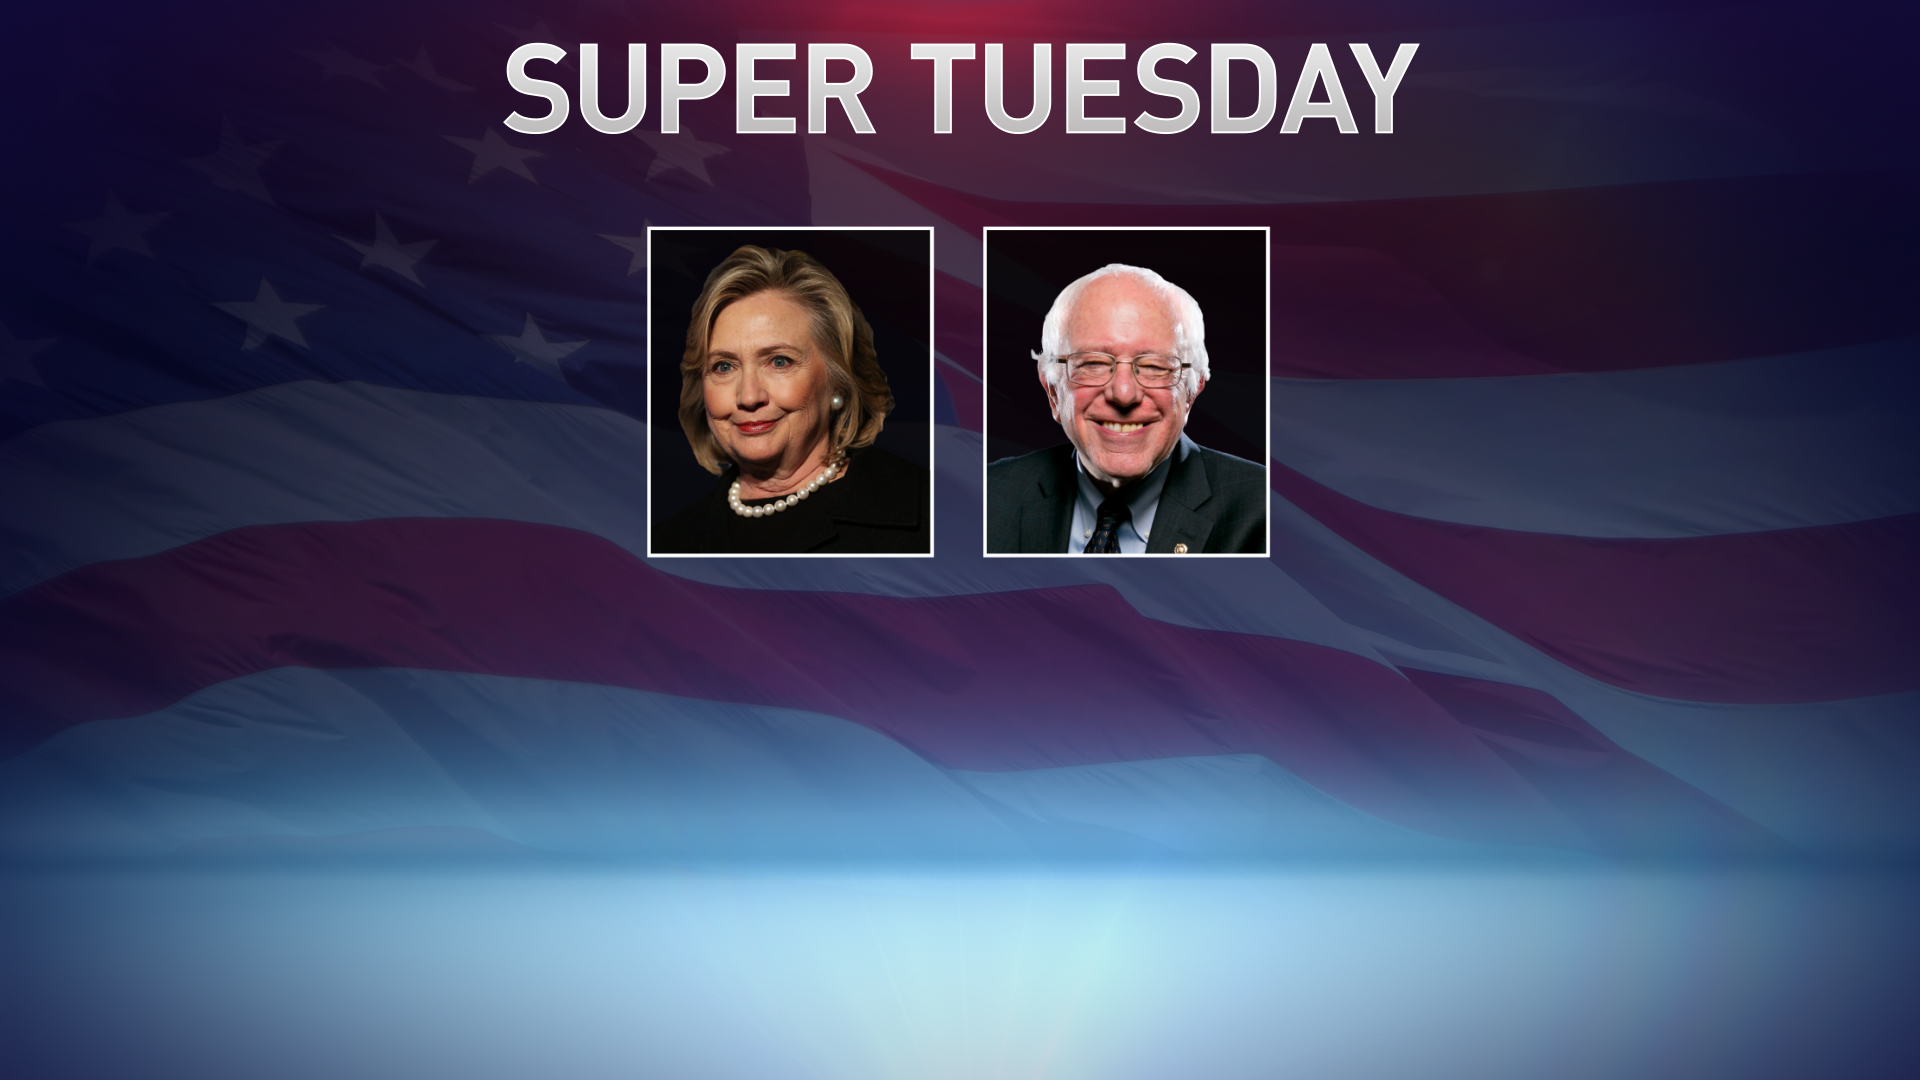 Super Tuesday Alabama Primary Results: Donald Trump, Hillary Clinton Declared Winners